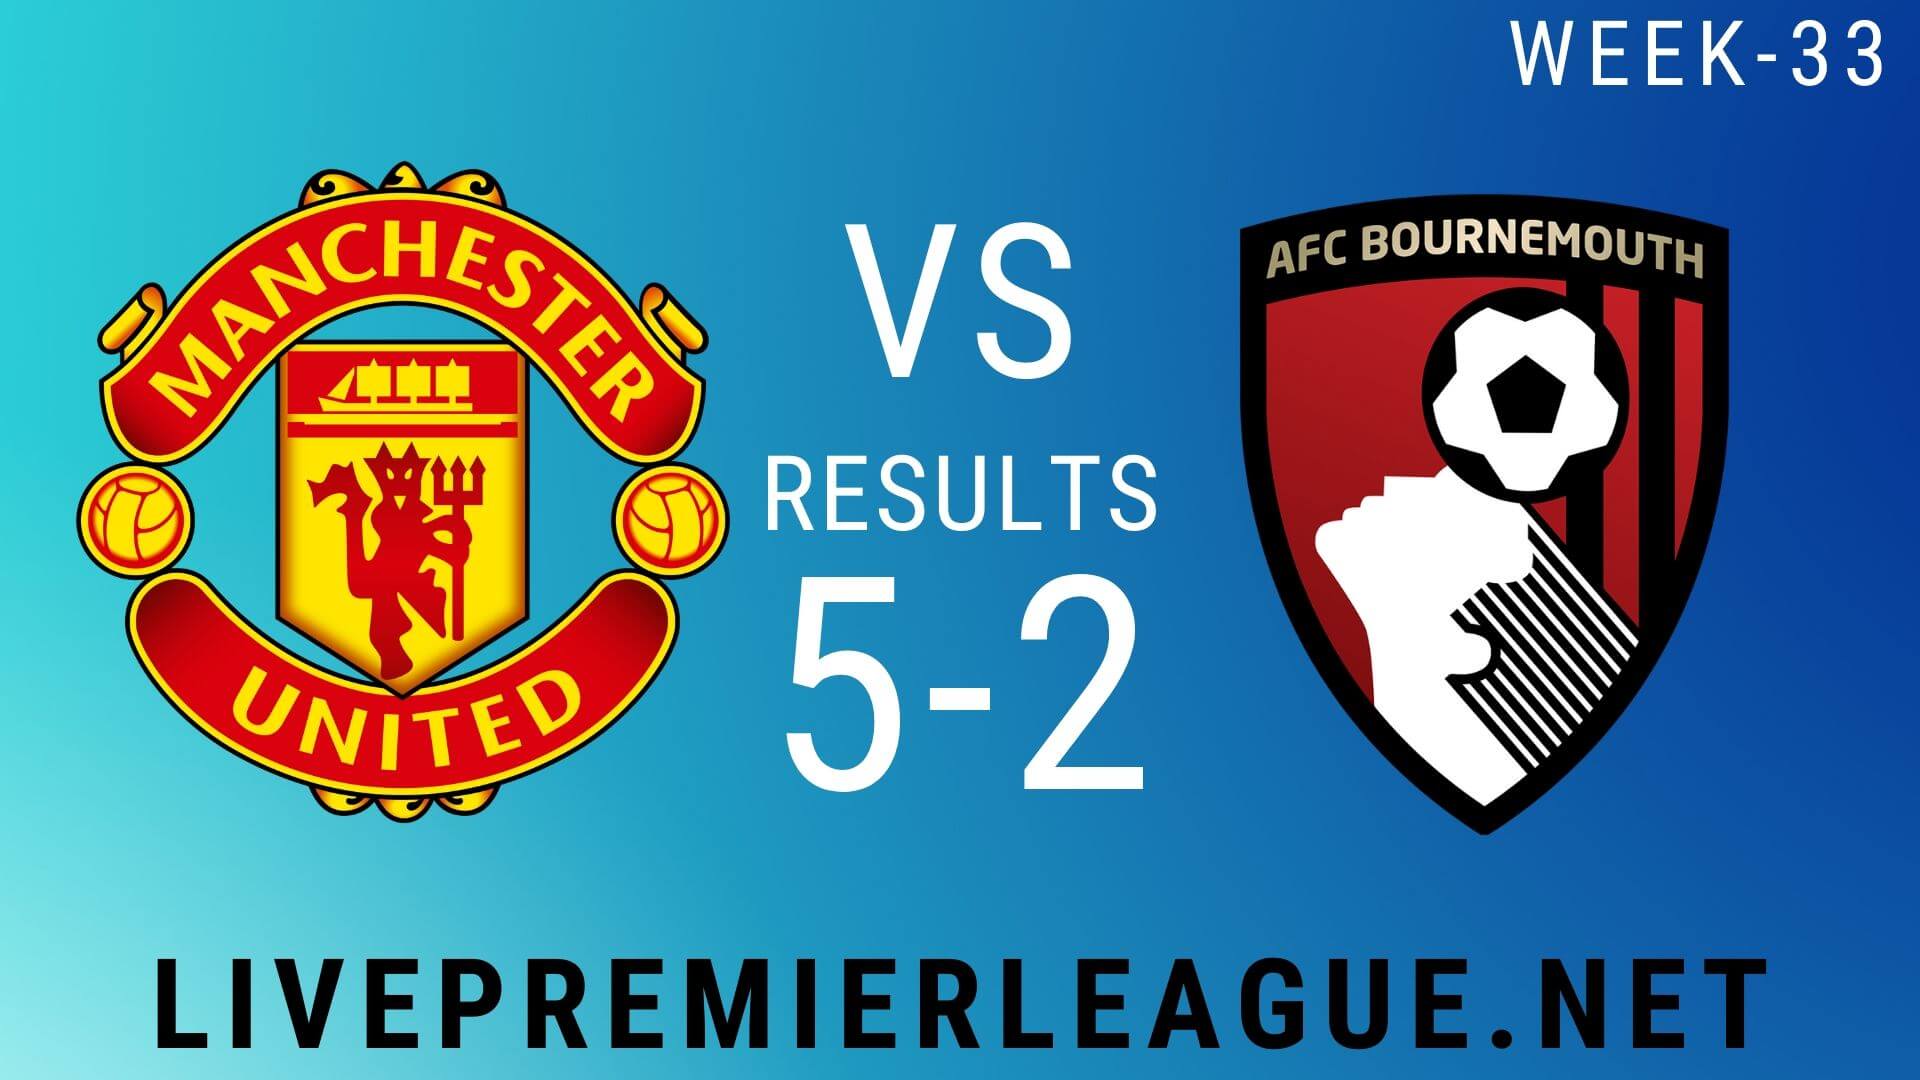 Manchester United Vs AFC Bournemouth | Week 33 Result 2020